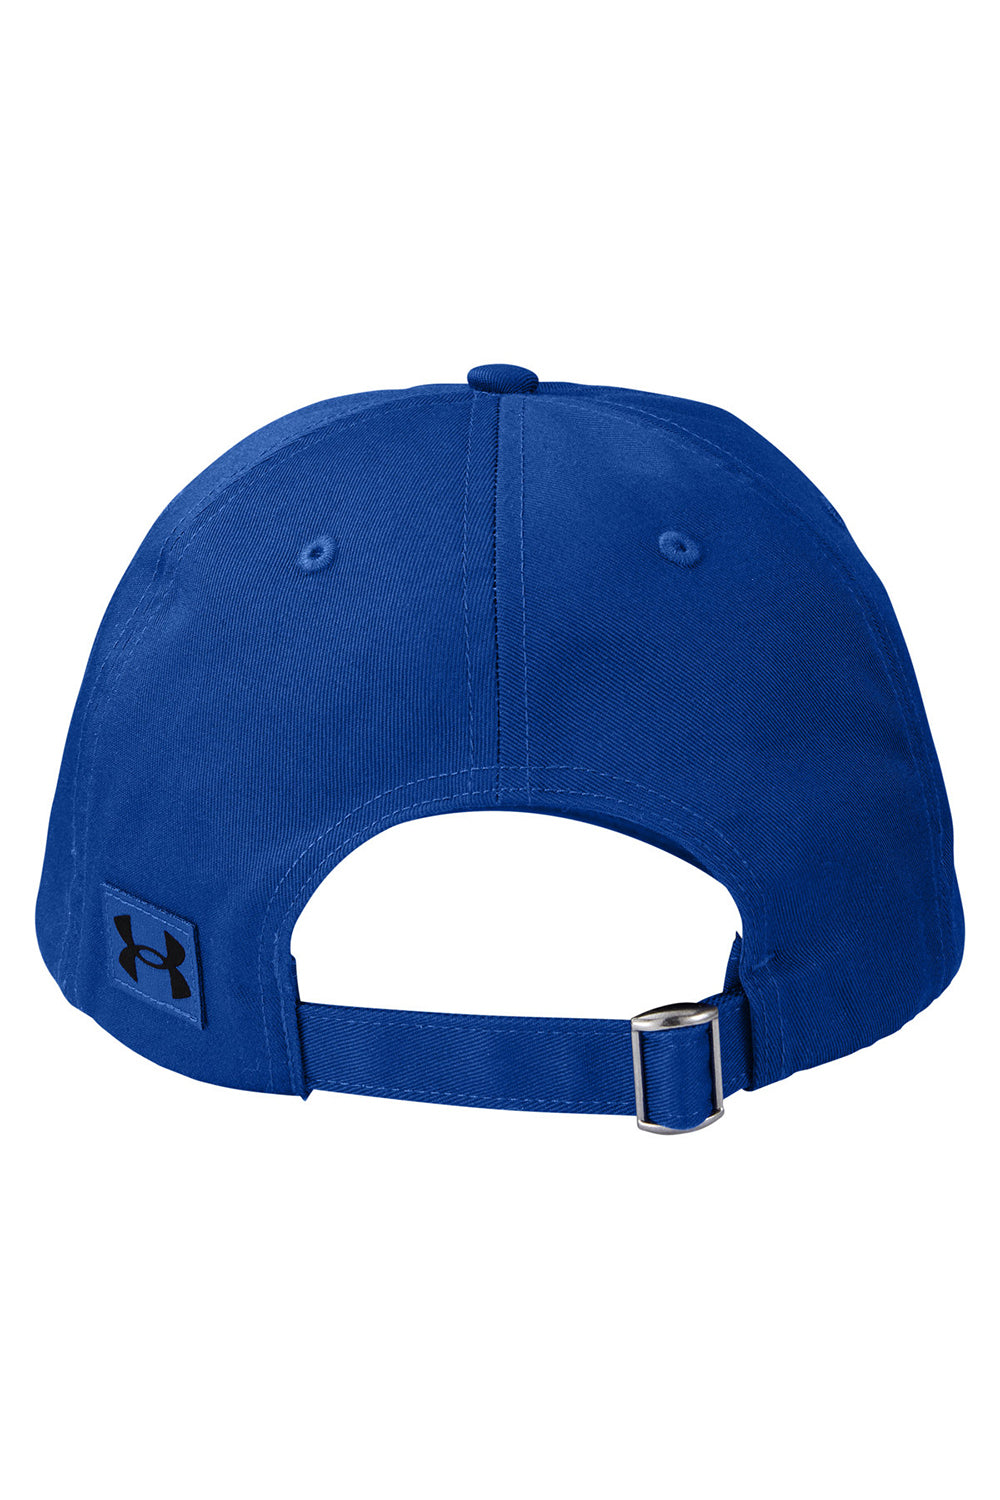 Under Armour 1369785  Moisture Wicking Team Chino Adjustable Hat Royal Blue Flat Back